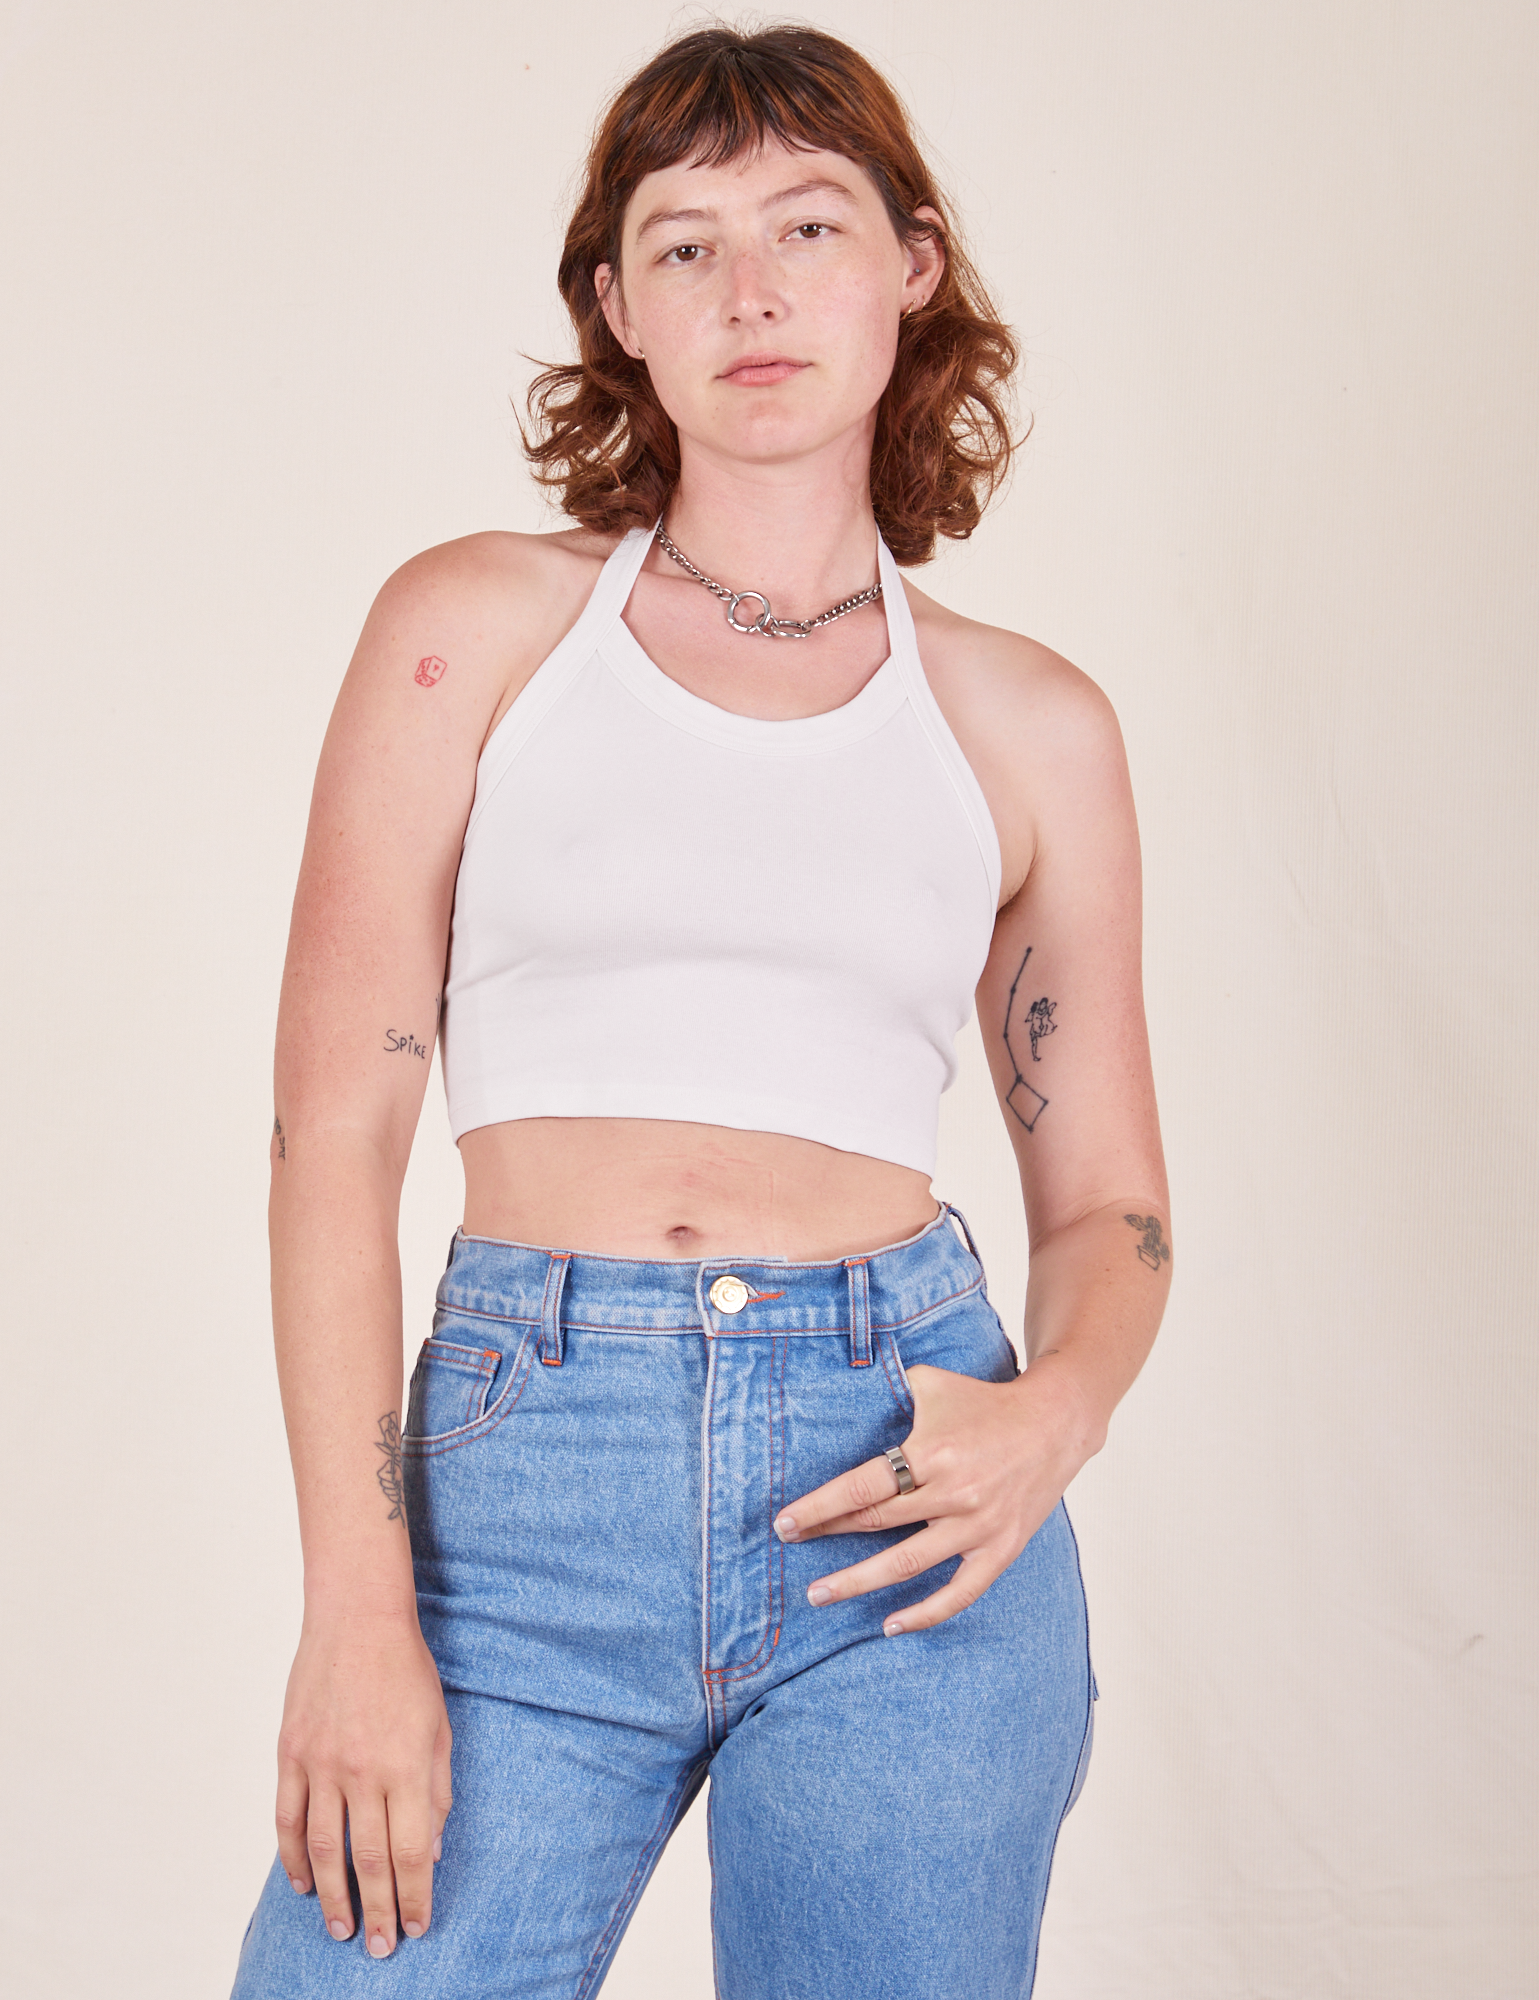 Alex is 5&#39;8&quot; and wearing P Halter Top in Vintage Tee Off-White paired with light wash Frontier Pants